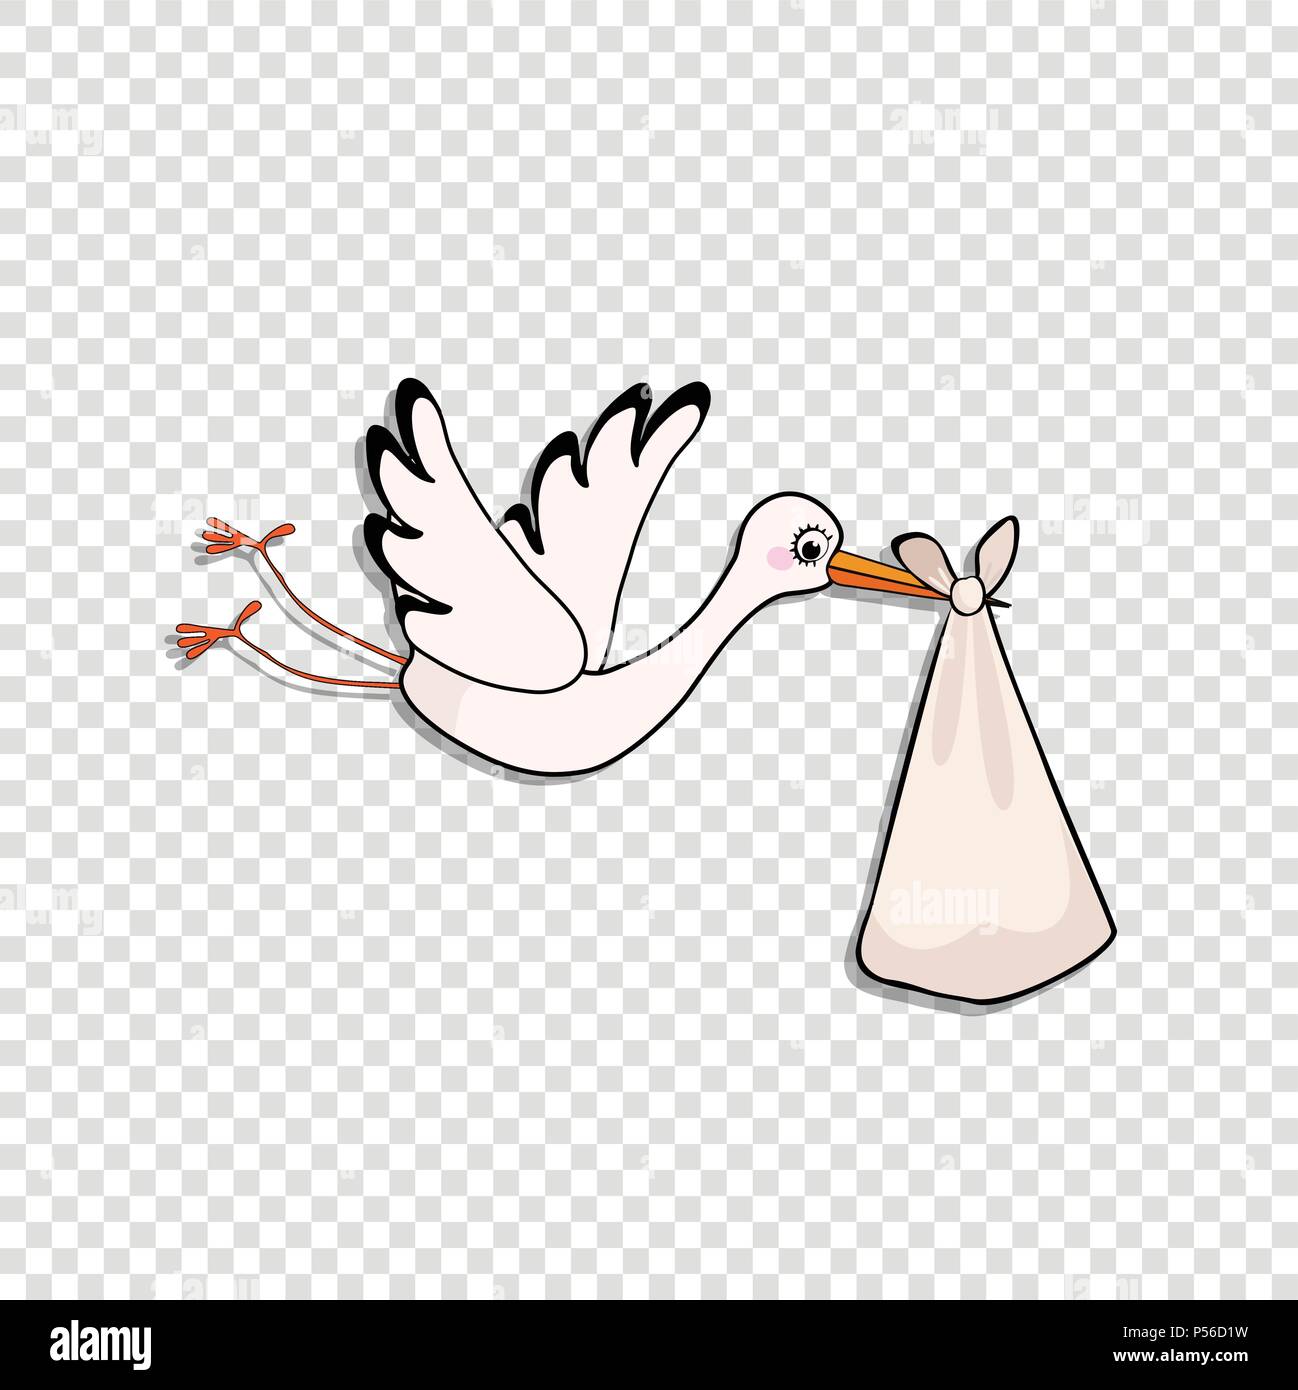 Cartoon vector illustration of cute stork delivering baby bundle isolated on transparent background. Baby shower clip art or sticker for greeting card Stock Vector